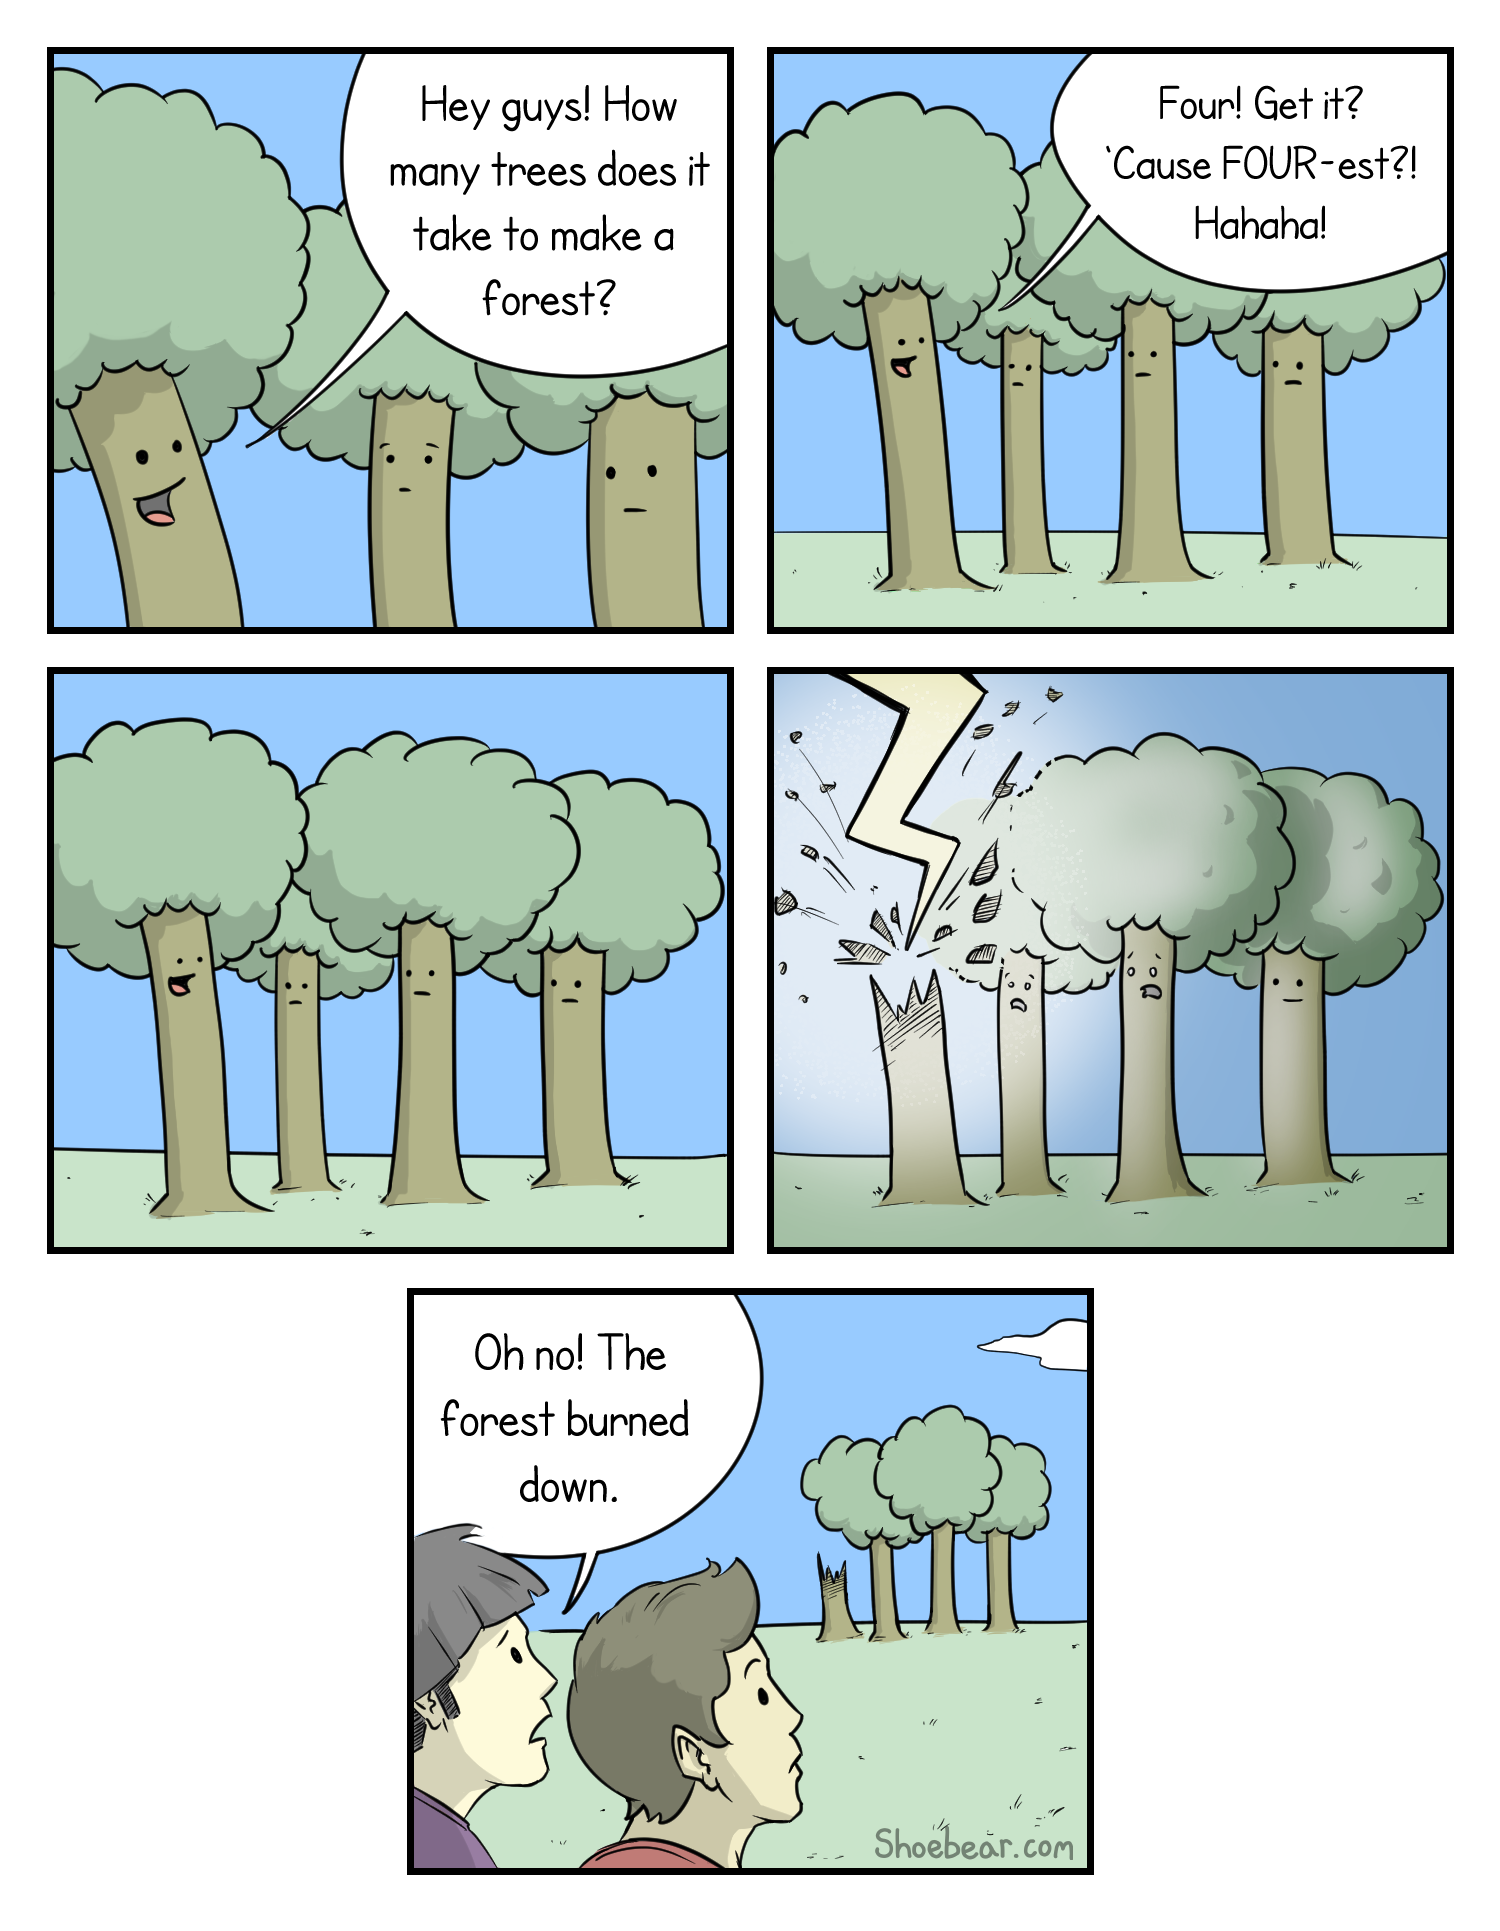 How many trees does it take to make a forest?